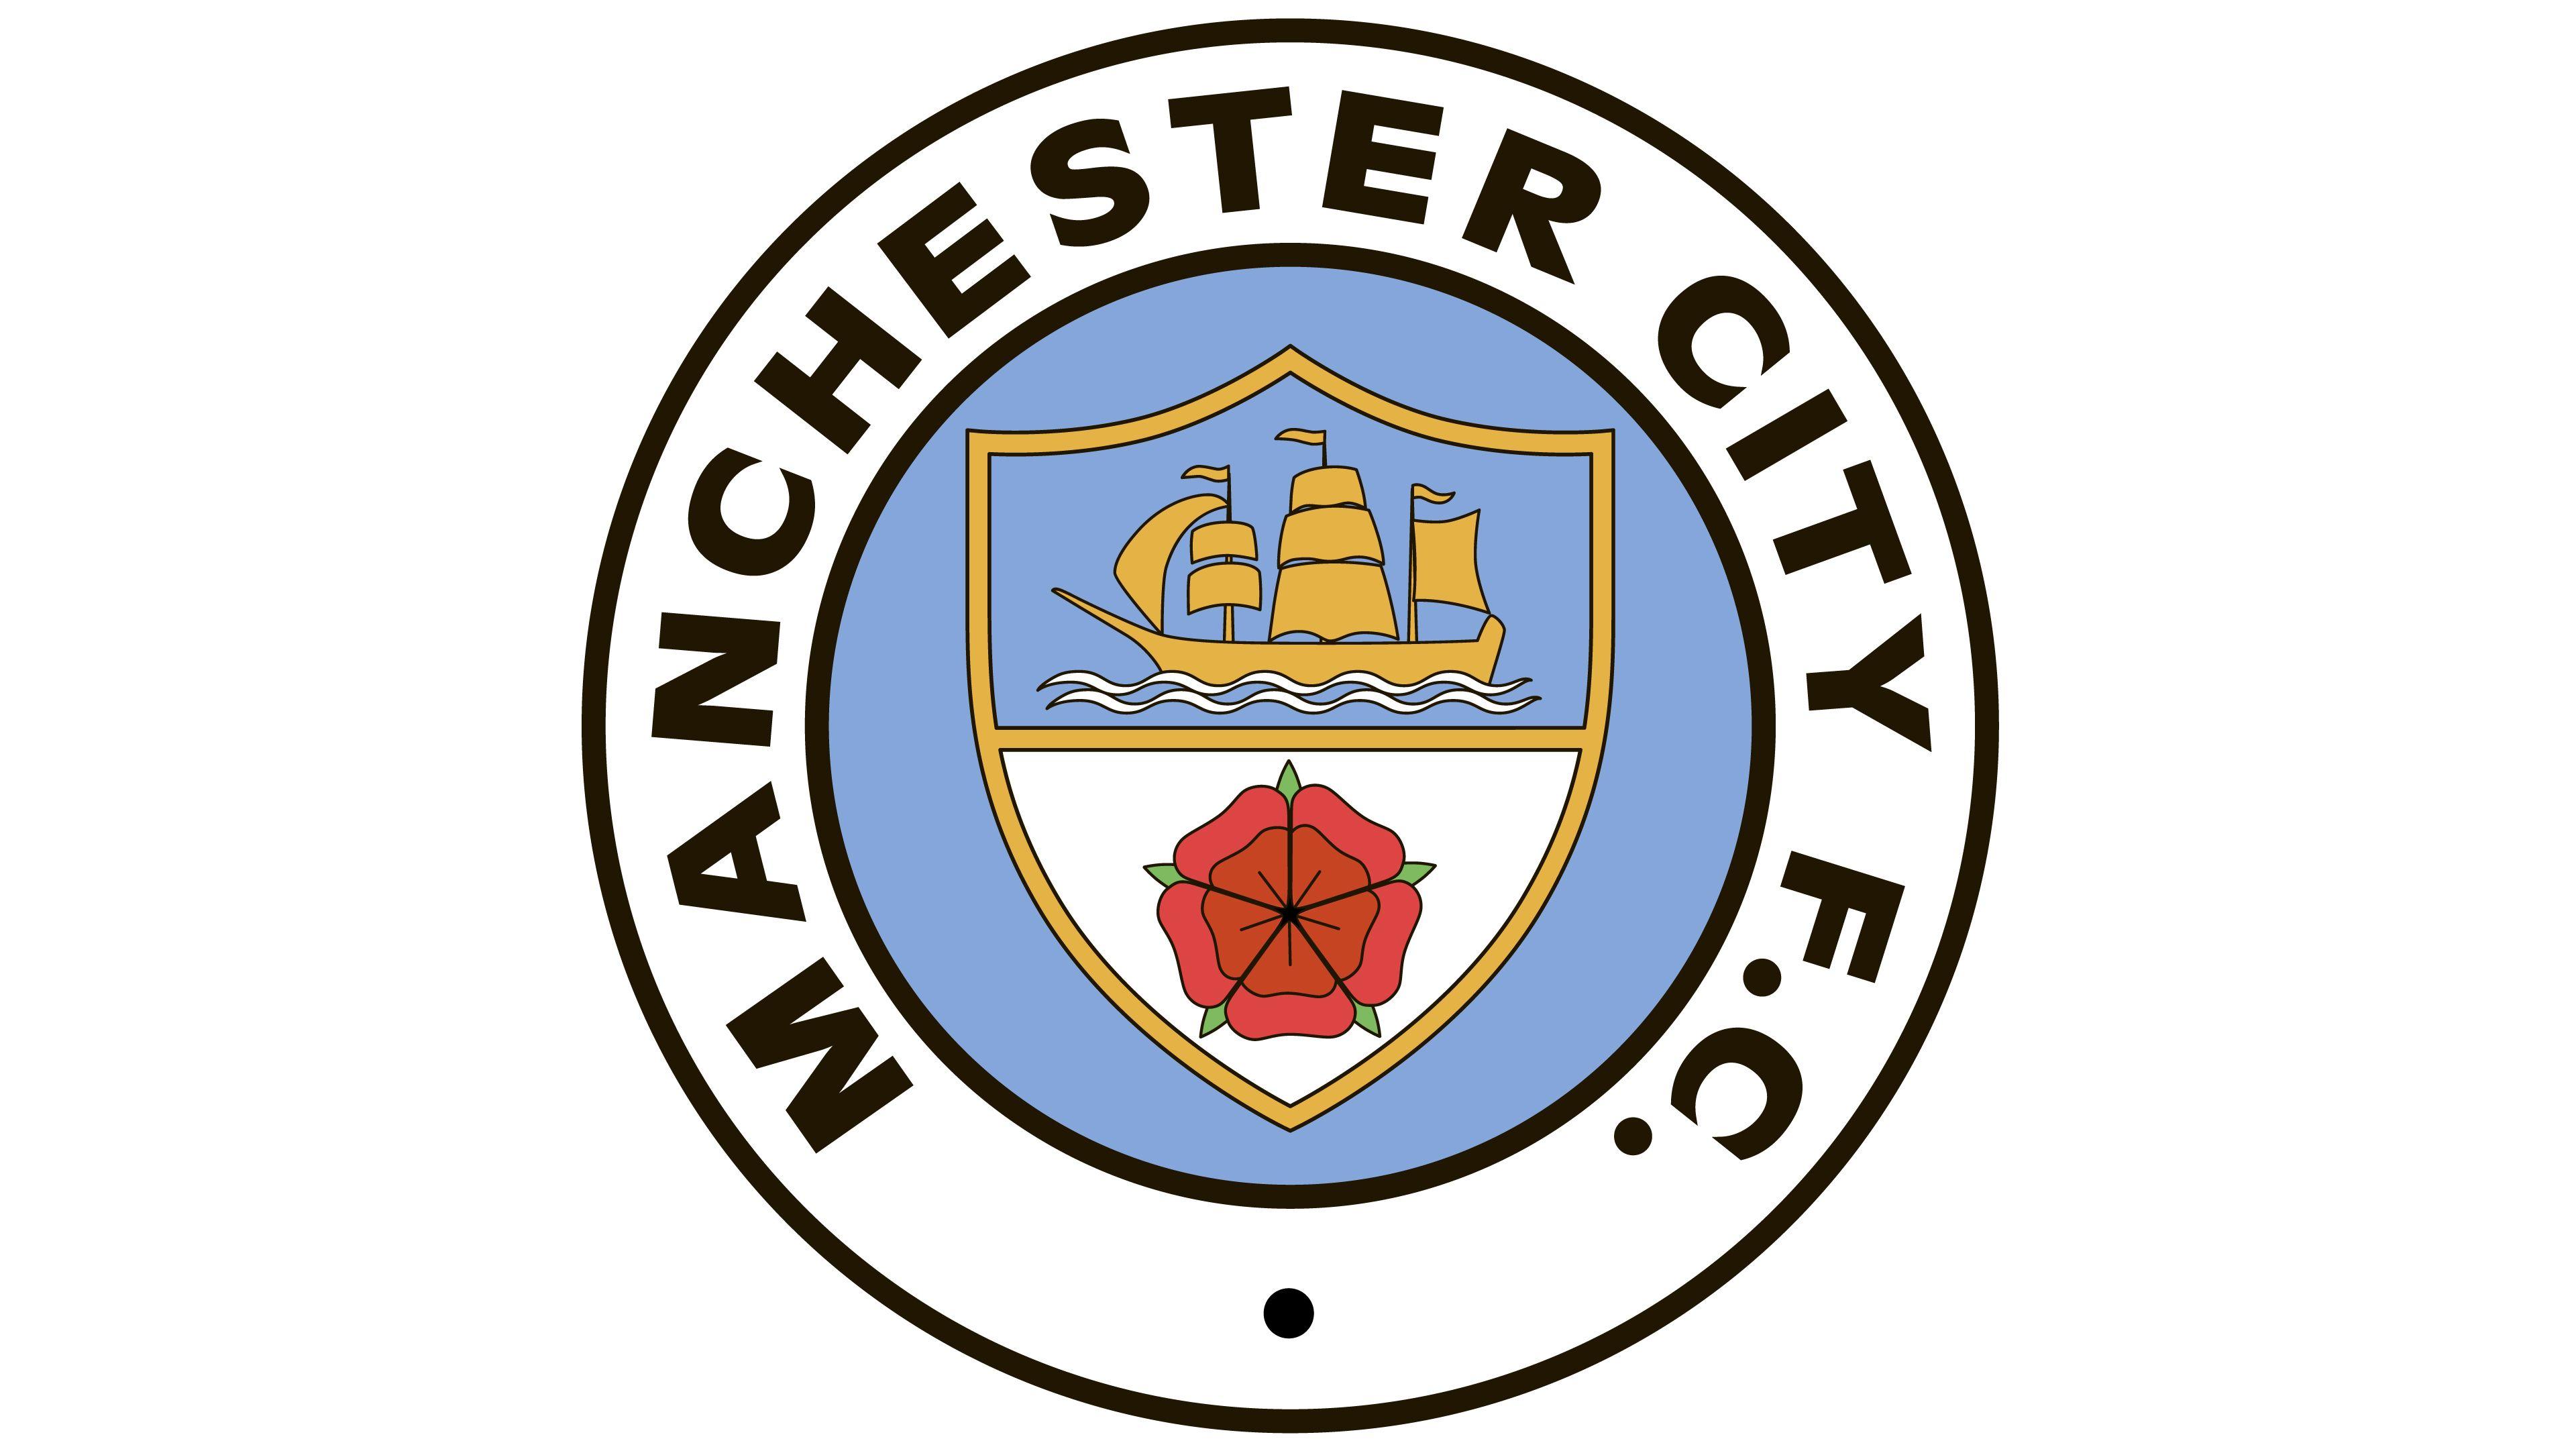 M.C.f.c Logo - Manchester City logo - Interesting History of the Team Name and emblem